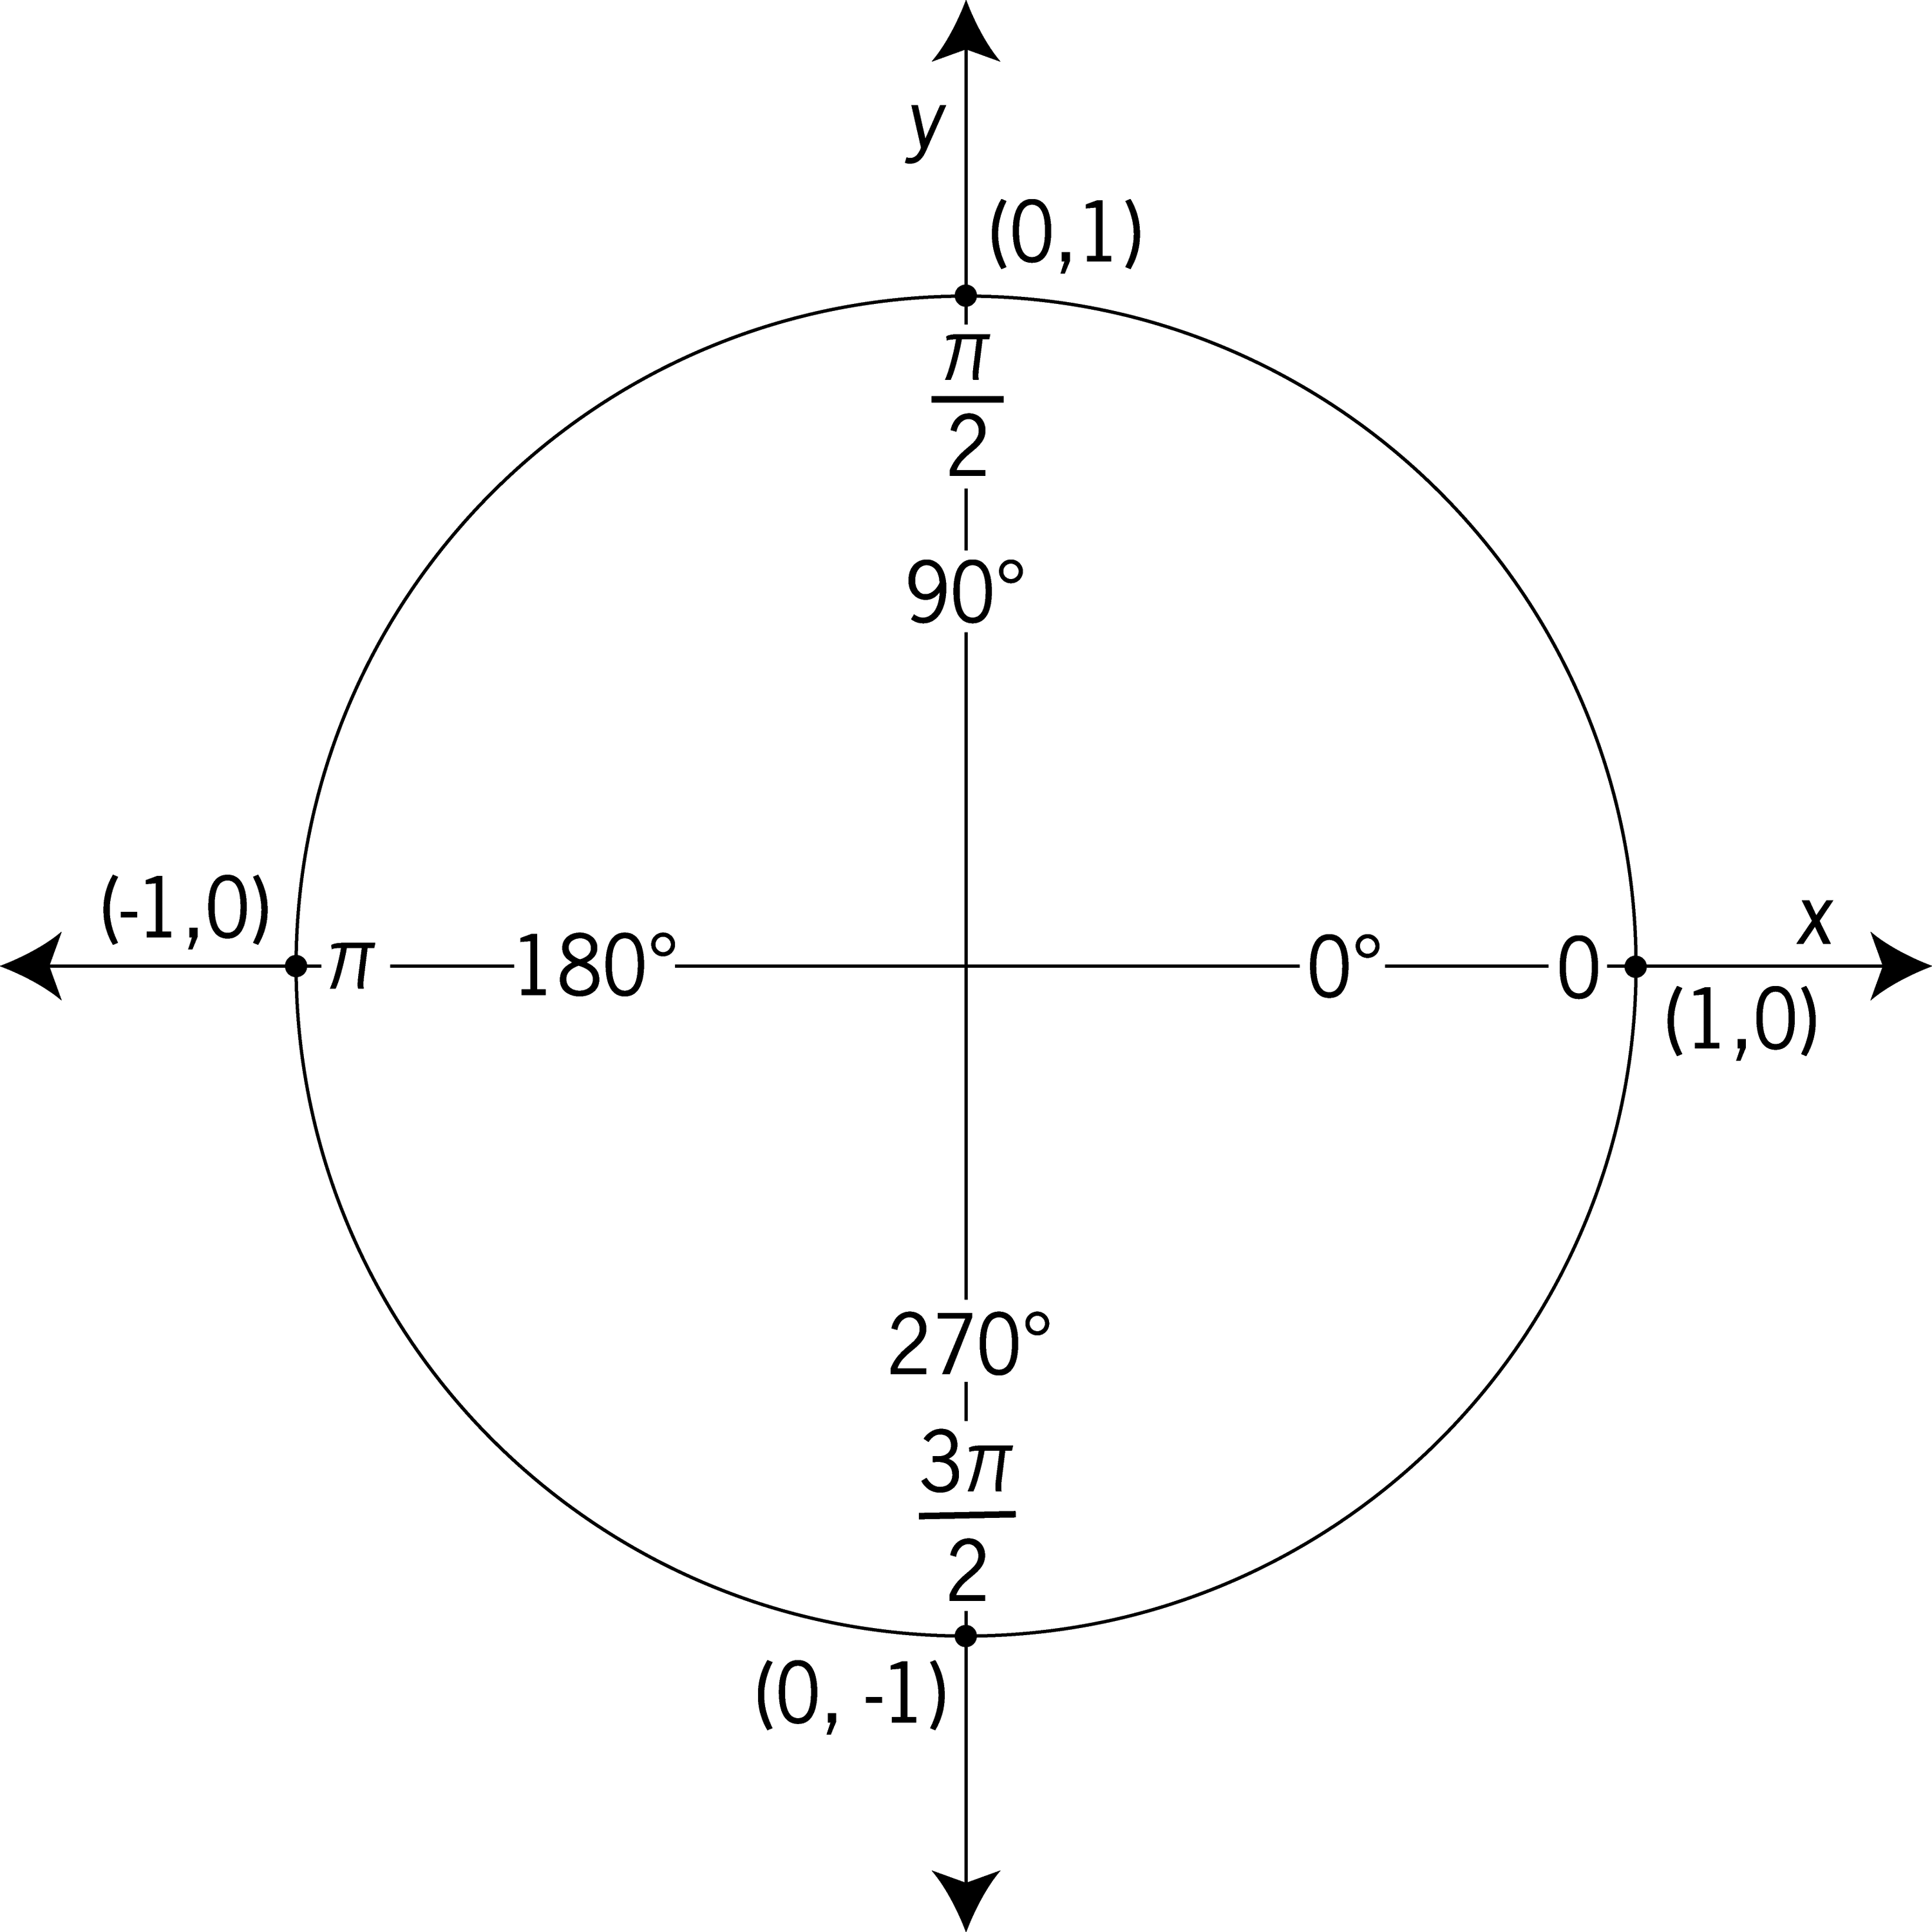 Unit Circle Labeled With Quadrantal Angles And Values | ClipArt ETC